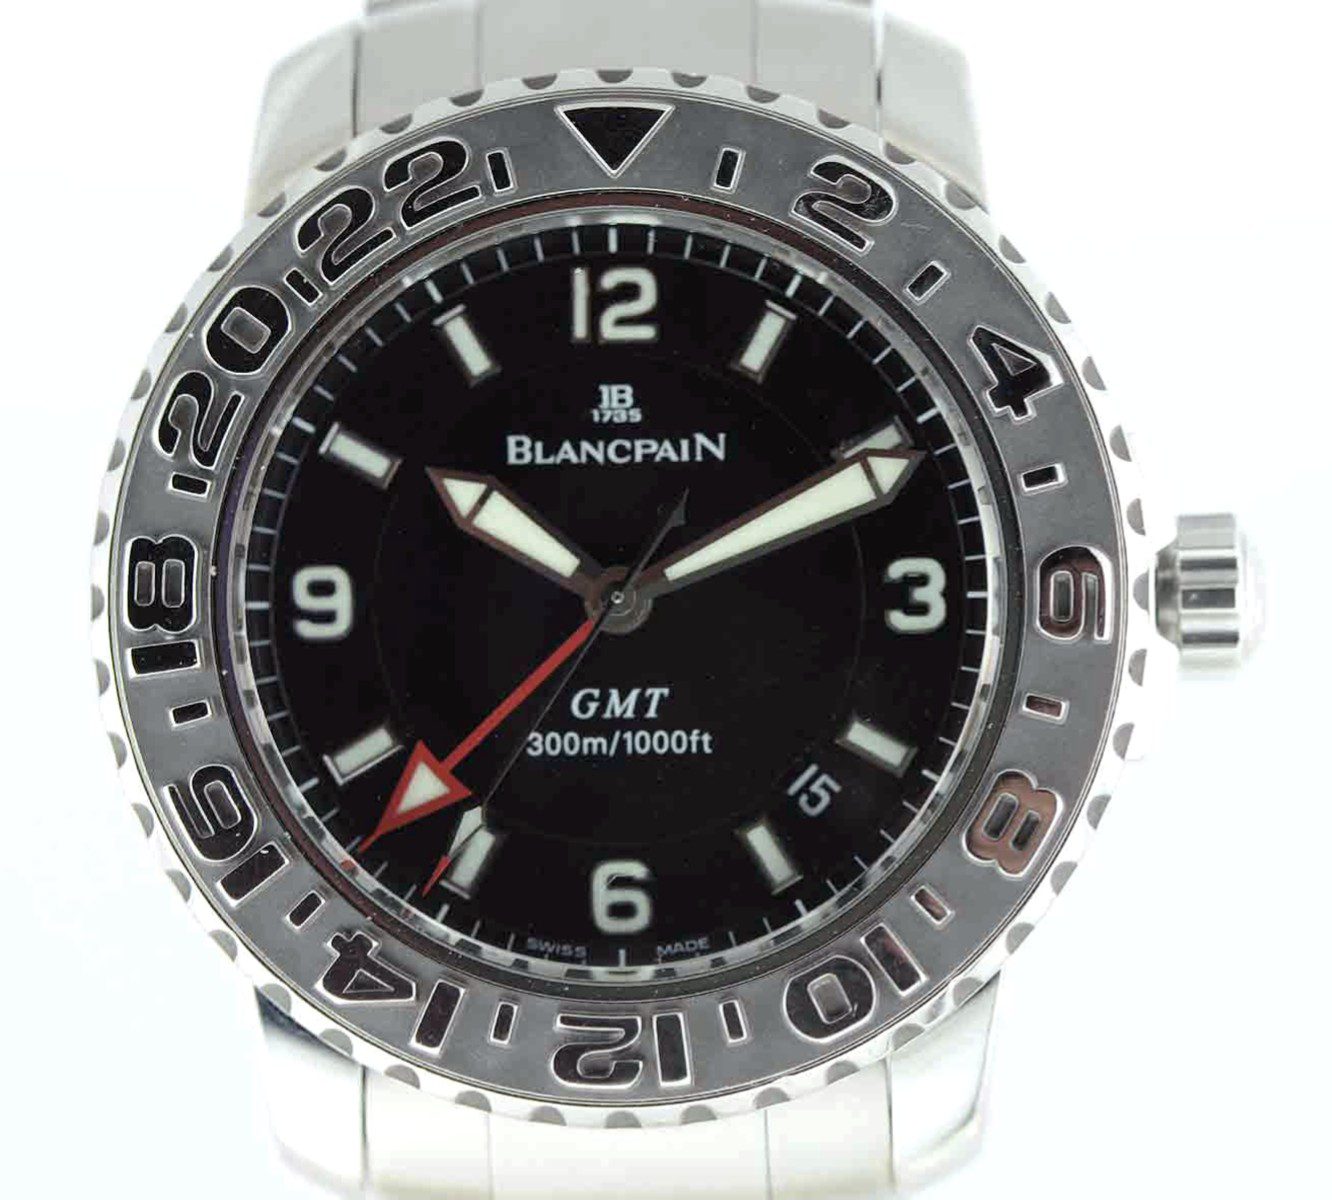 Blancpain Air Command Fifty Fathoms GMT Model No: 2250 1130 71